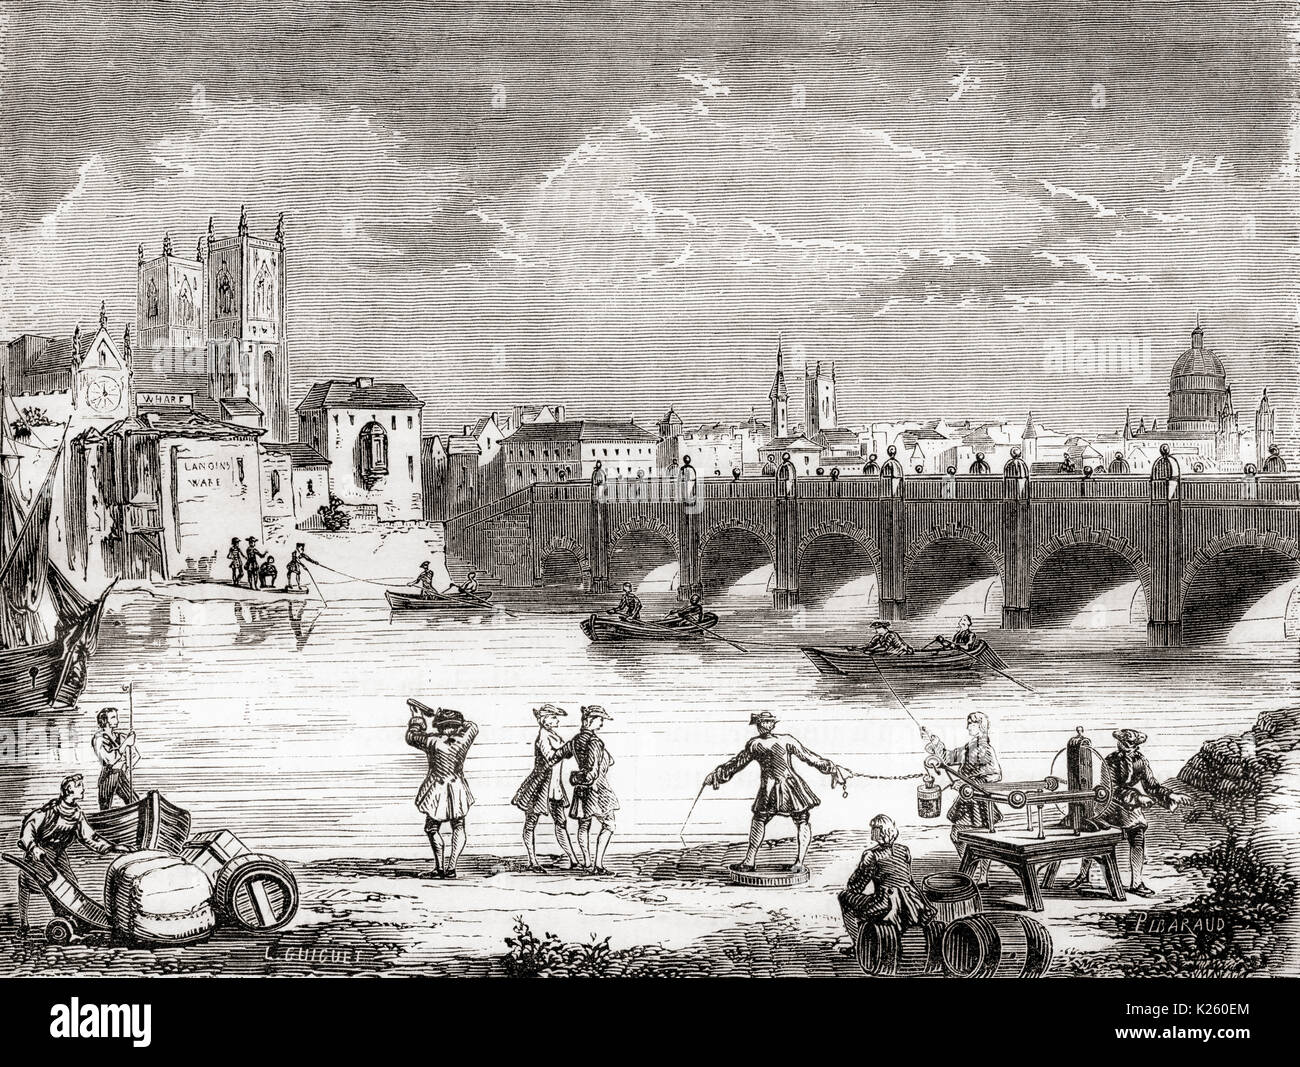 A Royal Society Experiment carried out in 1747 to ascertain whether electric current could be carried from one side of the River Thames to the other using an Electrostatic generator to charge a Leyden Jar connected to a wire suspended above the Thames at Westminster Bridge. On each side of the river a participant held the wire in one hand whilst an iron rod was dipped into the river with the other. When the circuit was completed the Leyden Jar discharged its current. The shock was felt by the participants on both sides of the river.  From Les Merveilles de la Science, published 1870. Stock Photo